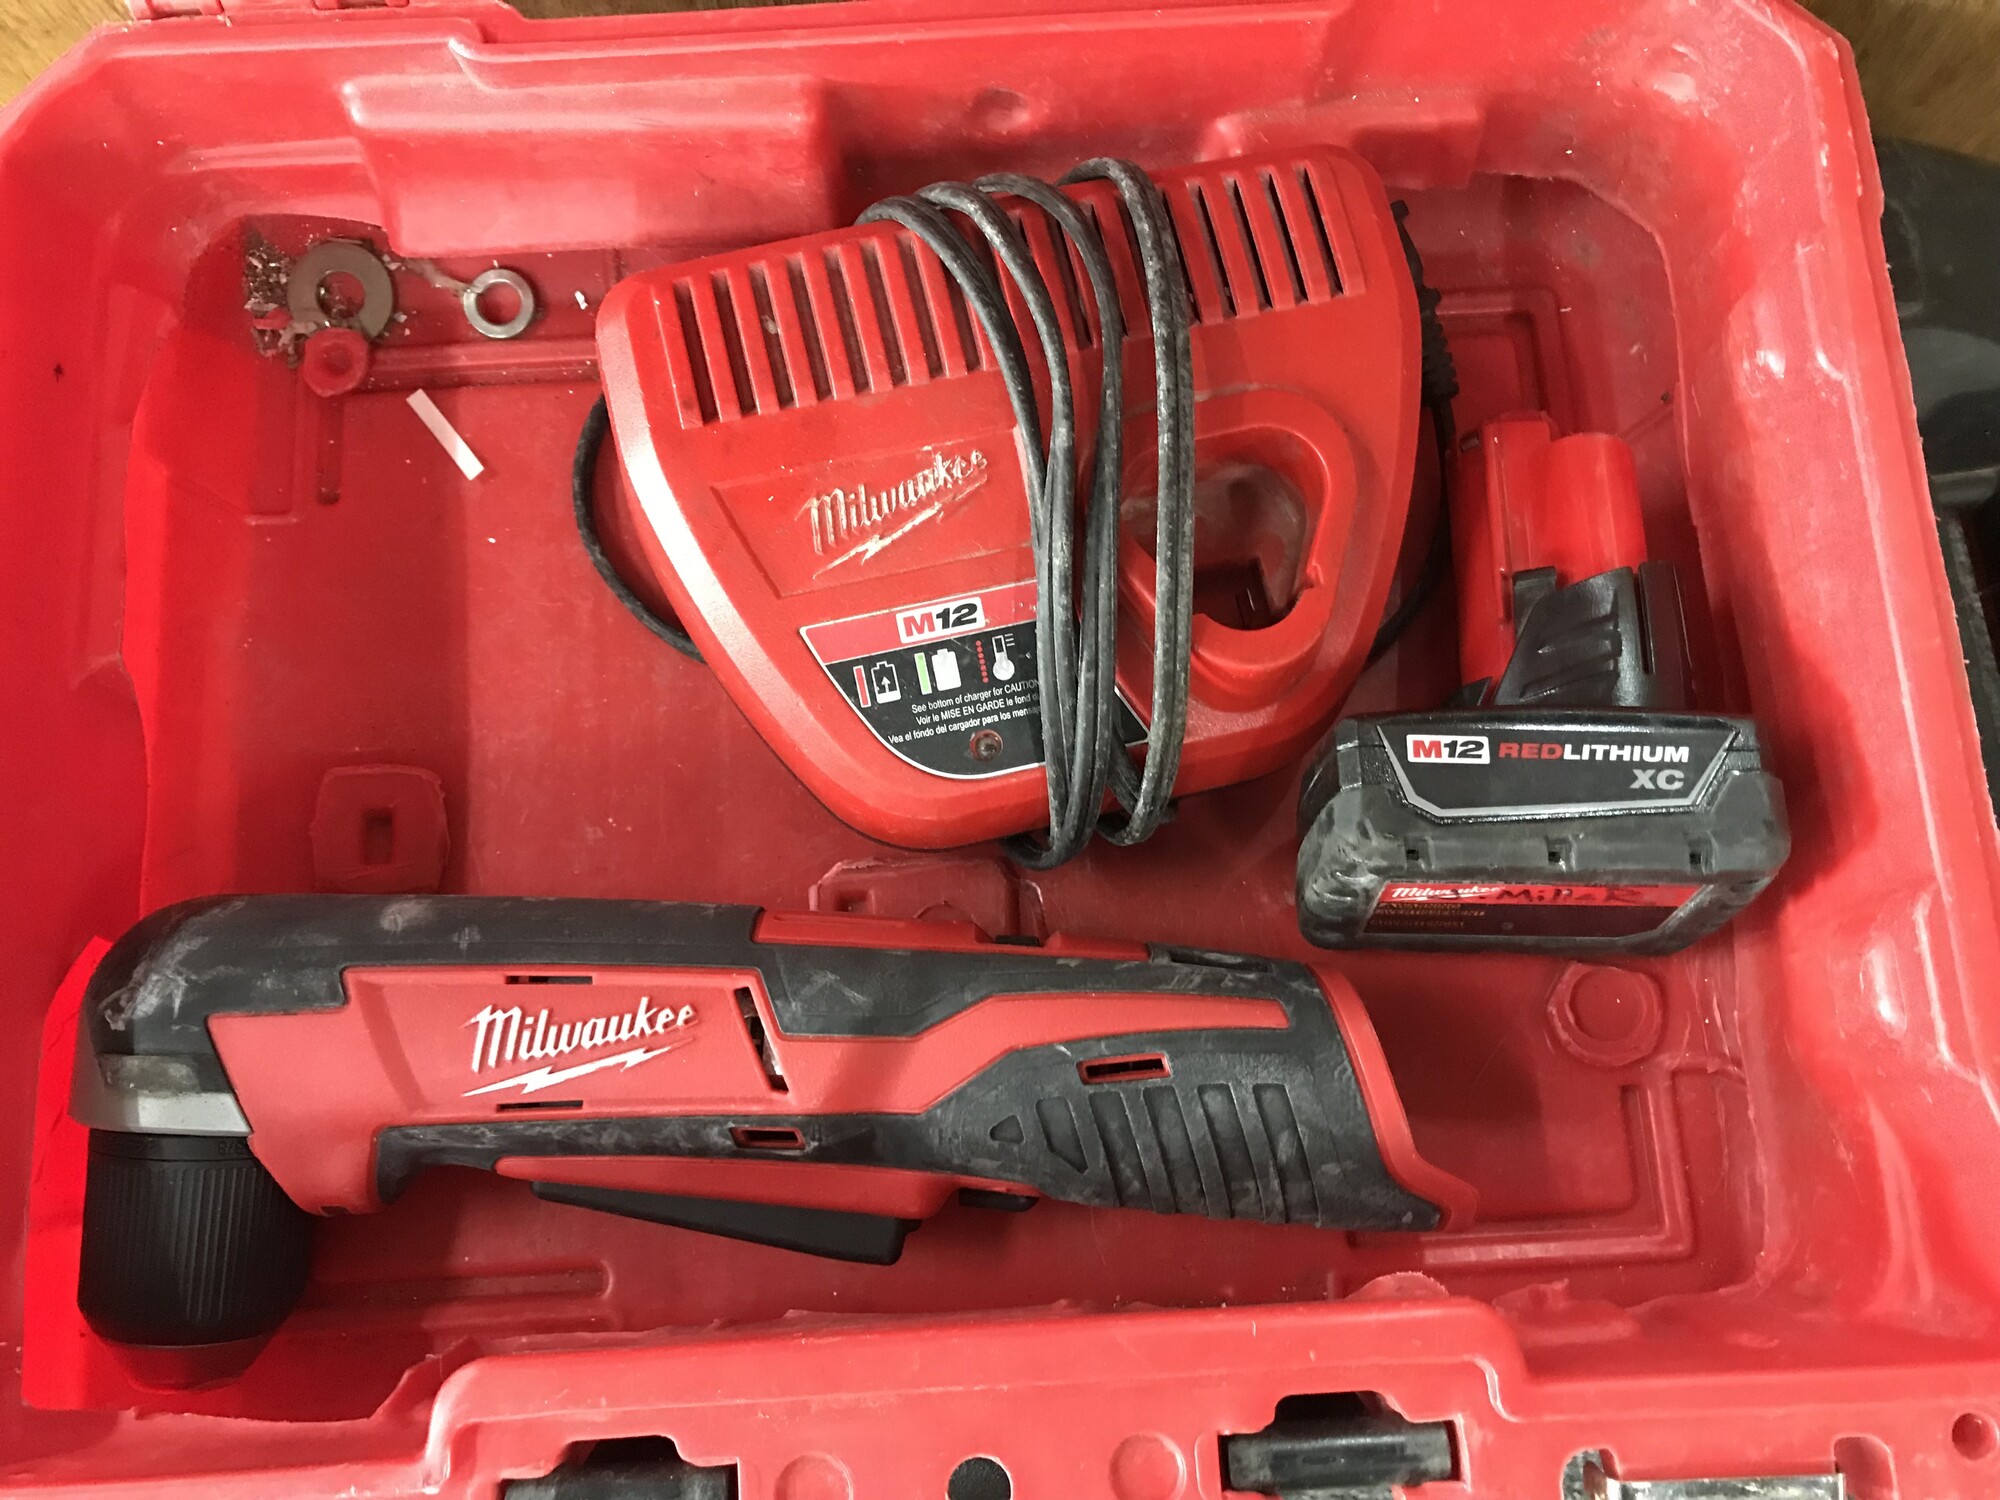 Rt Angle Drill, Milwaukee: M12
with XC battery and charger and case